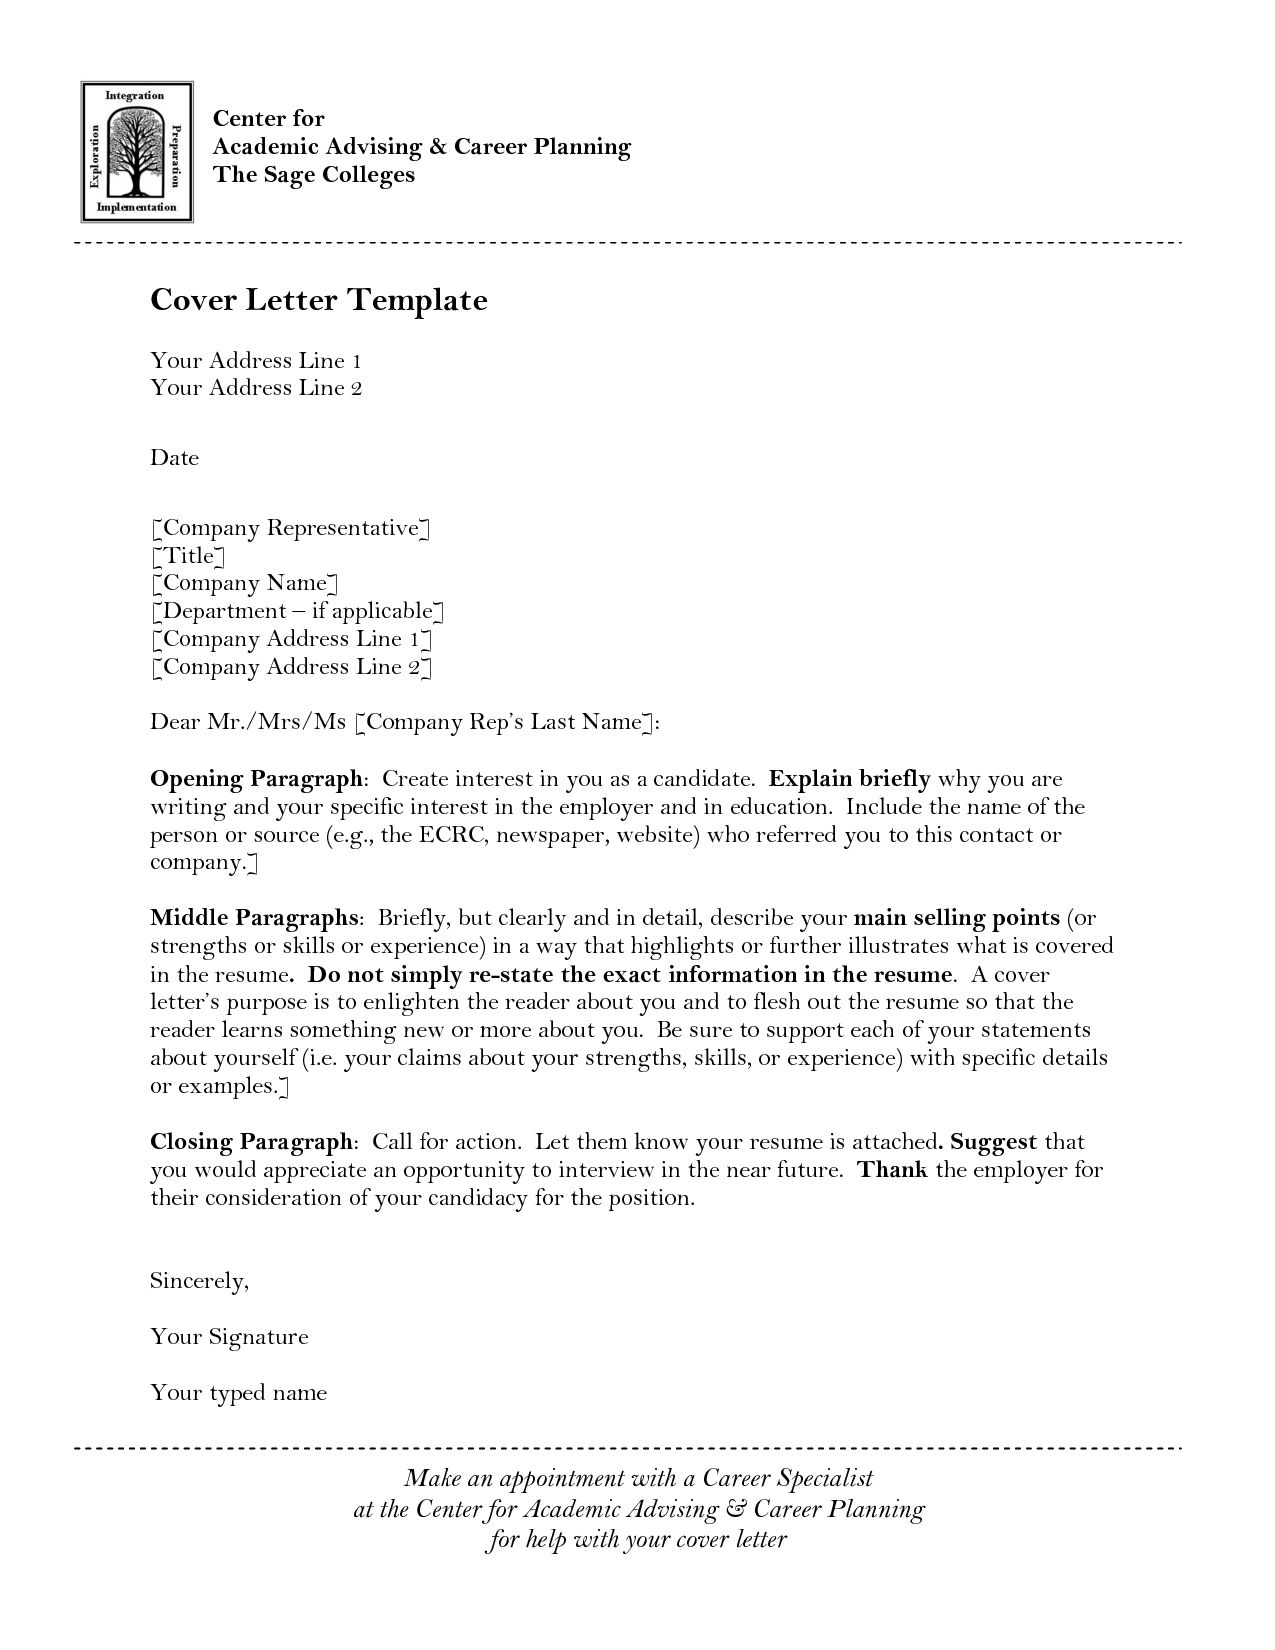 Cover Letter Template University Cover Letter For Resume with proportions 1275 X 1650